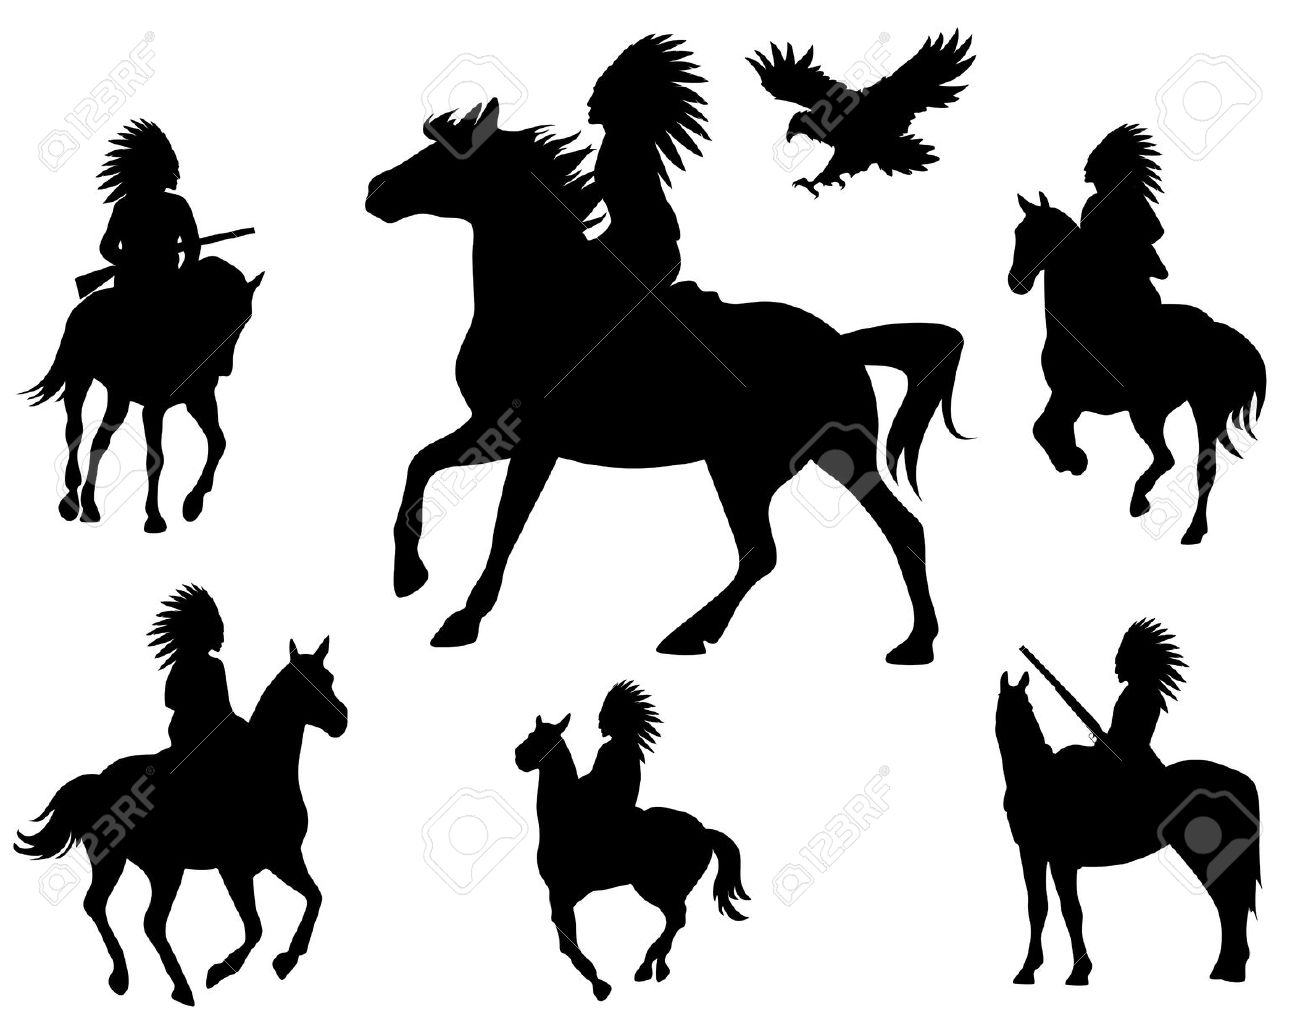 Indian On Horse Silhouette at GetDrawings.com.